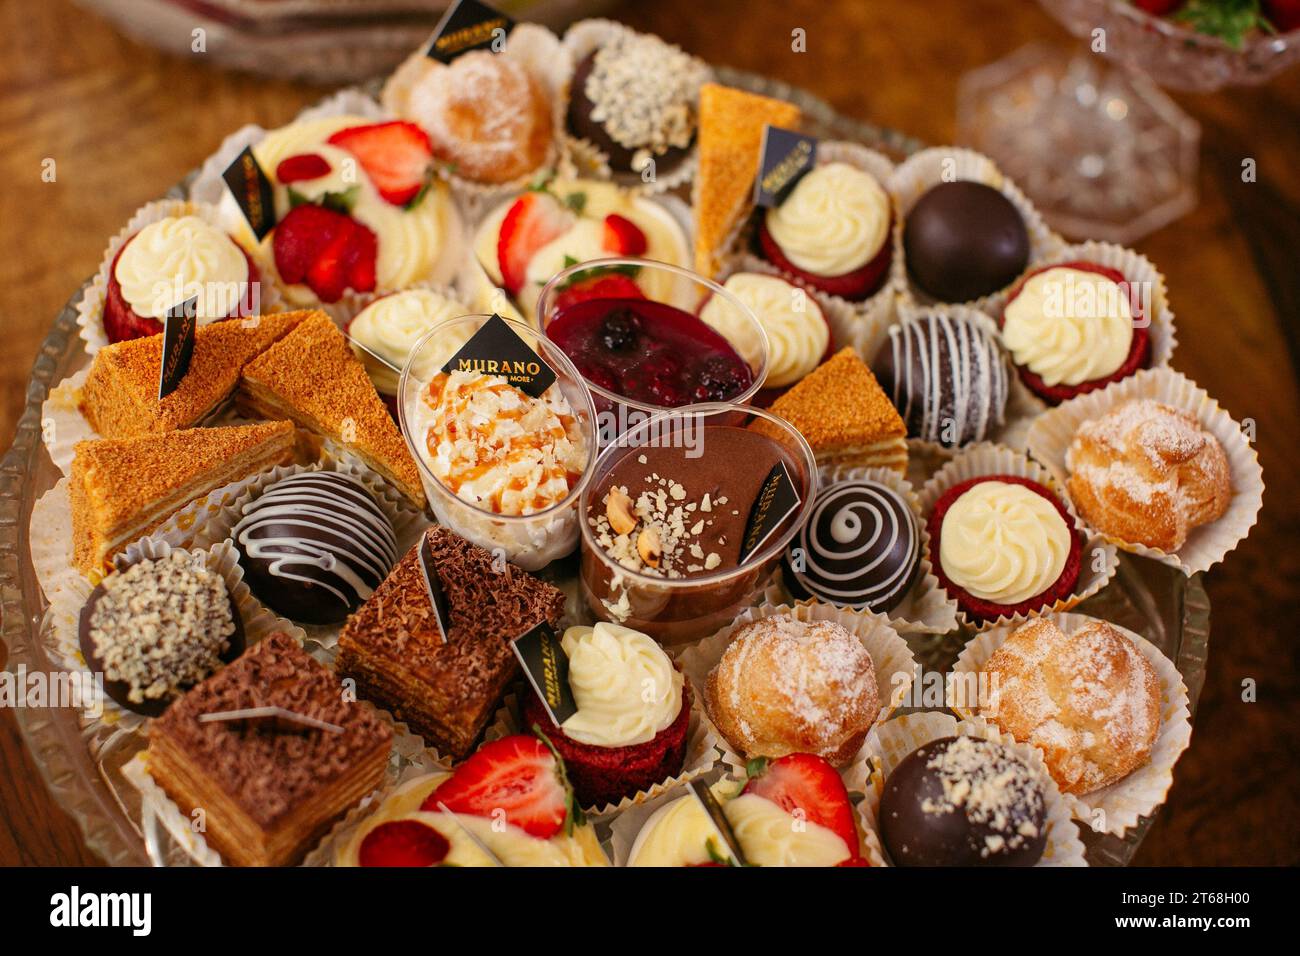 An ornately decorated platter filled with an array of delectable pastries, desserts and candies. Stock Photo